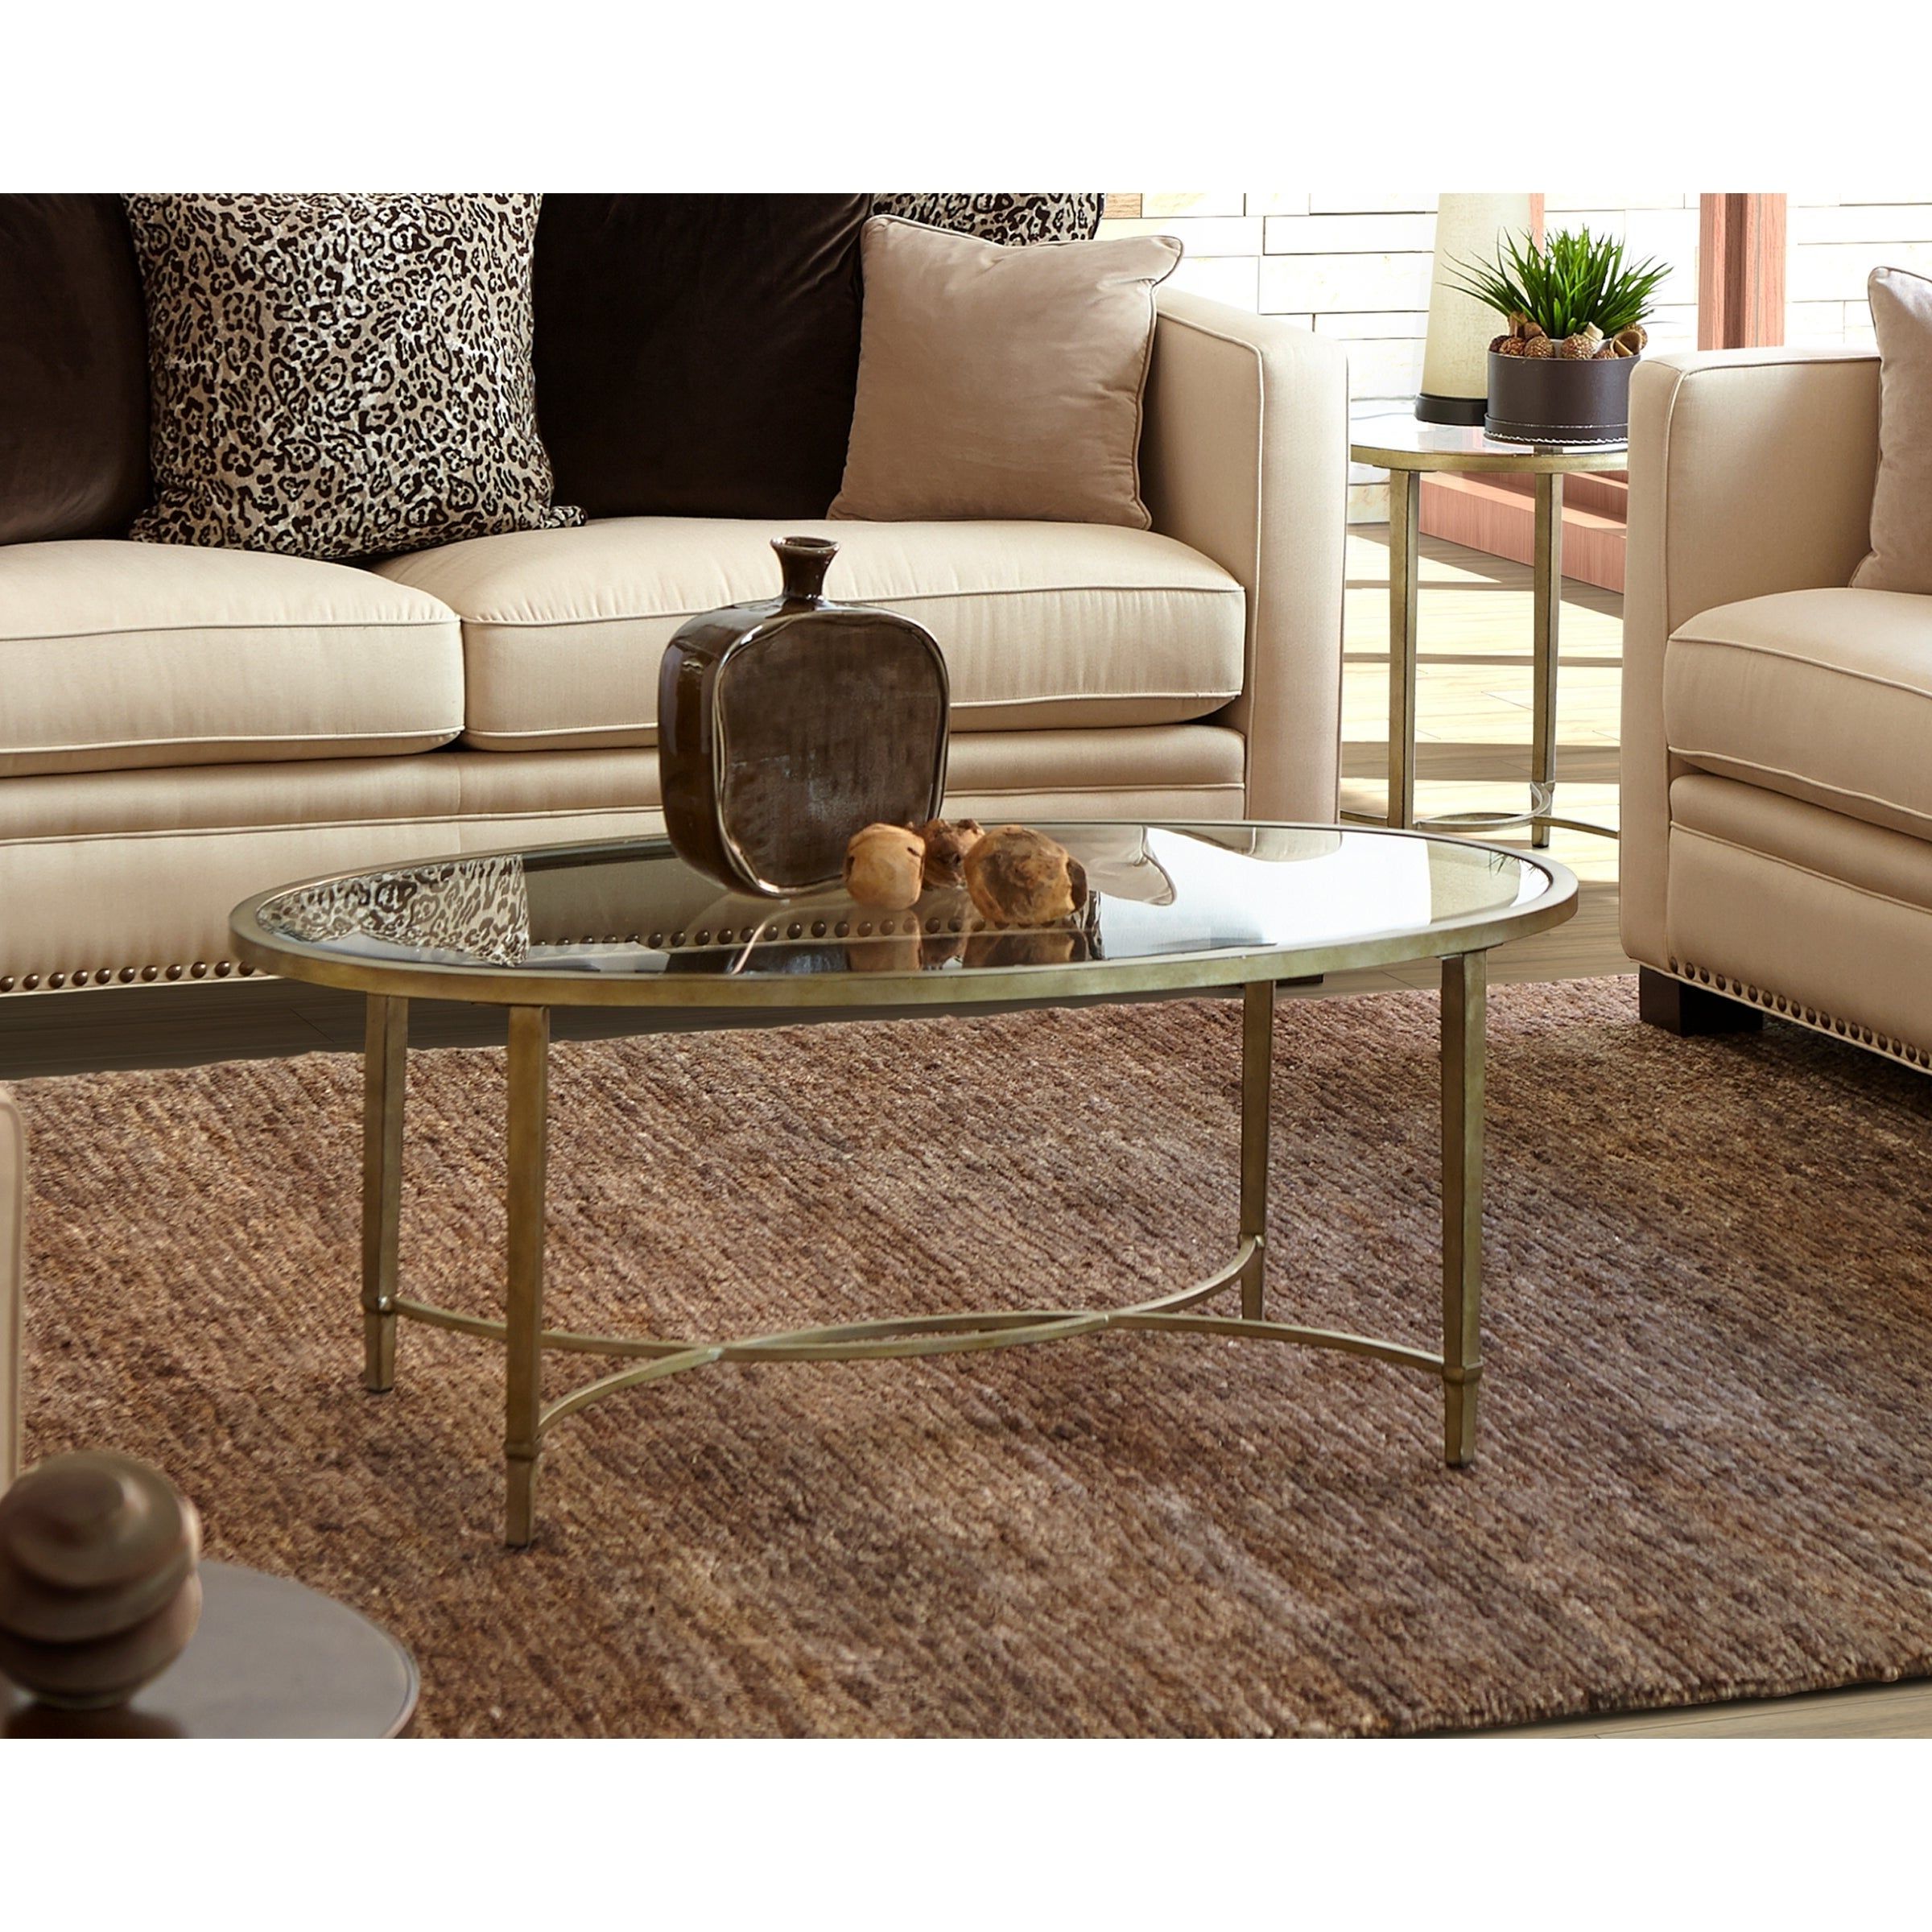 Shop Gracewood Hollow Derada Contemporary Gold Tinted For Popular Antique Silver Aluminum Coffee Tables (View 3 of 20)